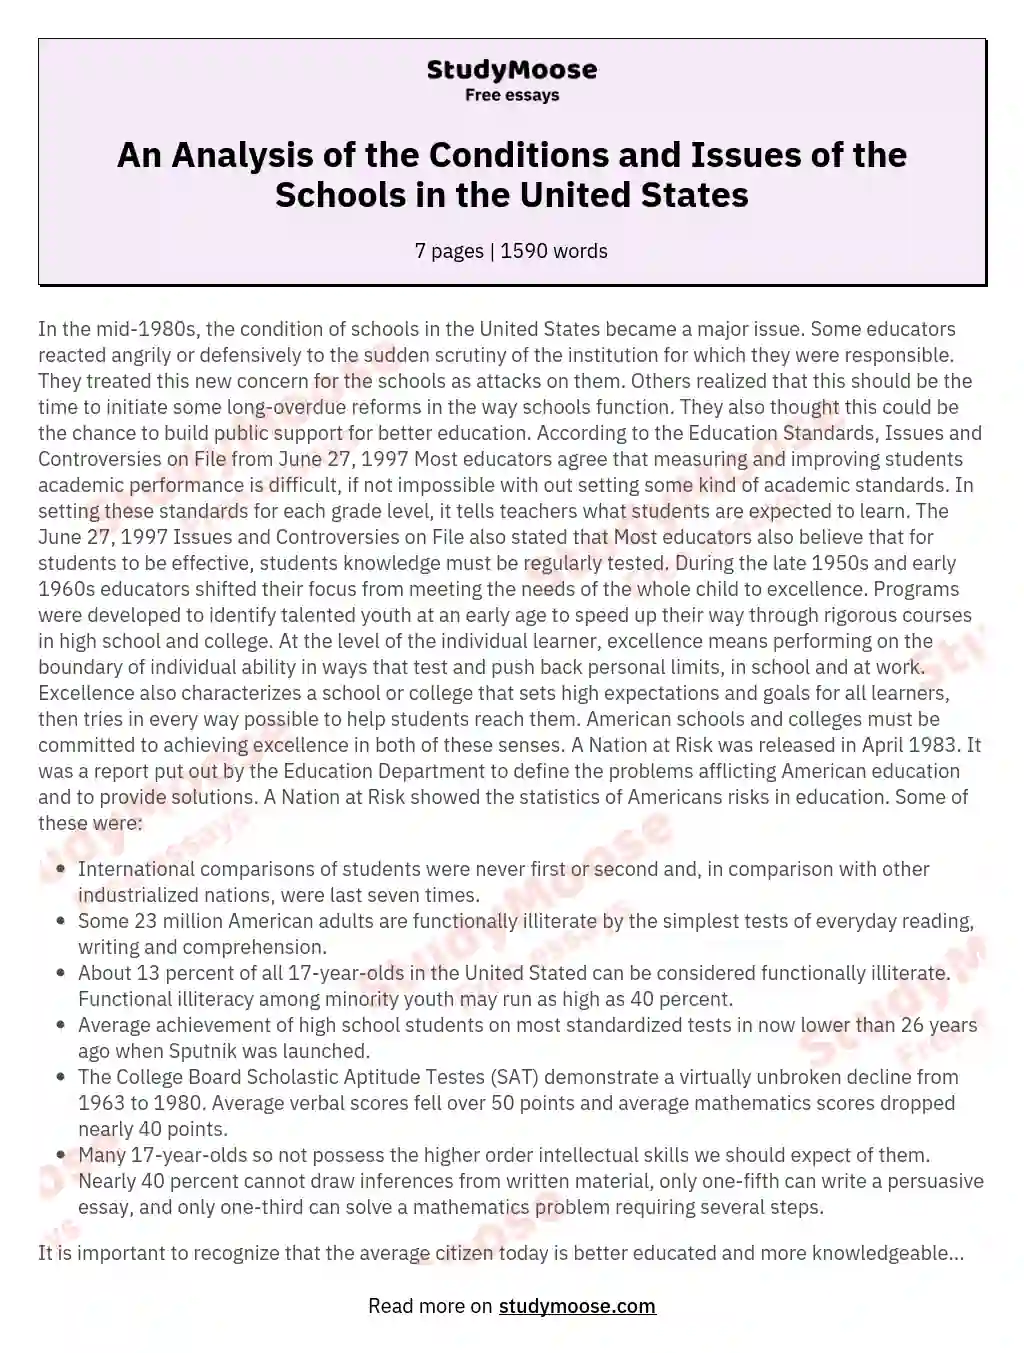 An Analysis of the Conditions and Issues of the Schools in the United States essay